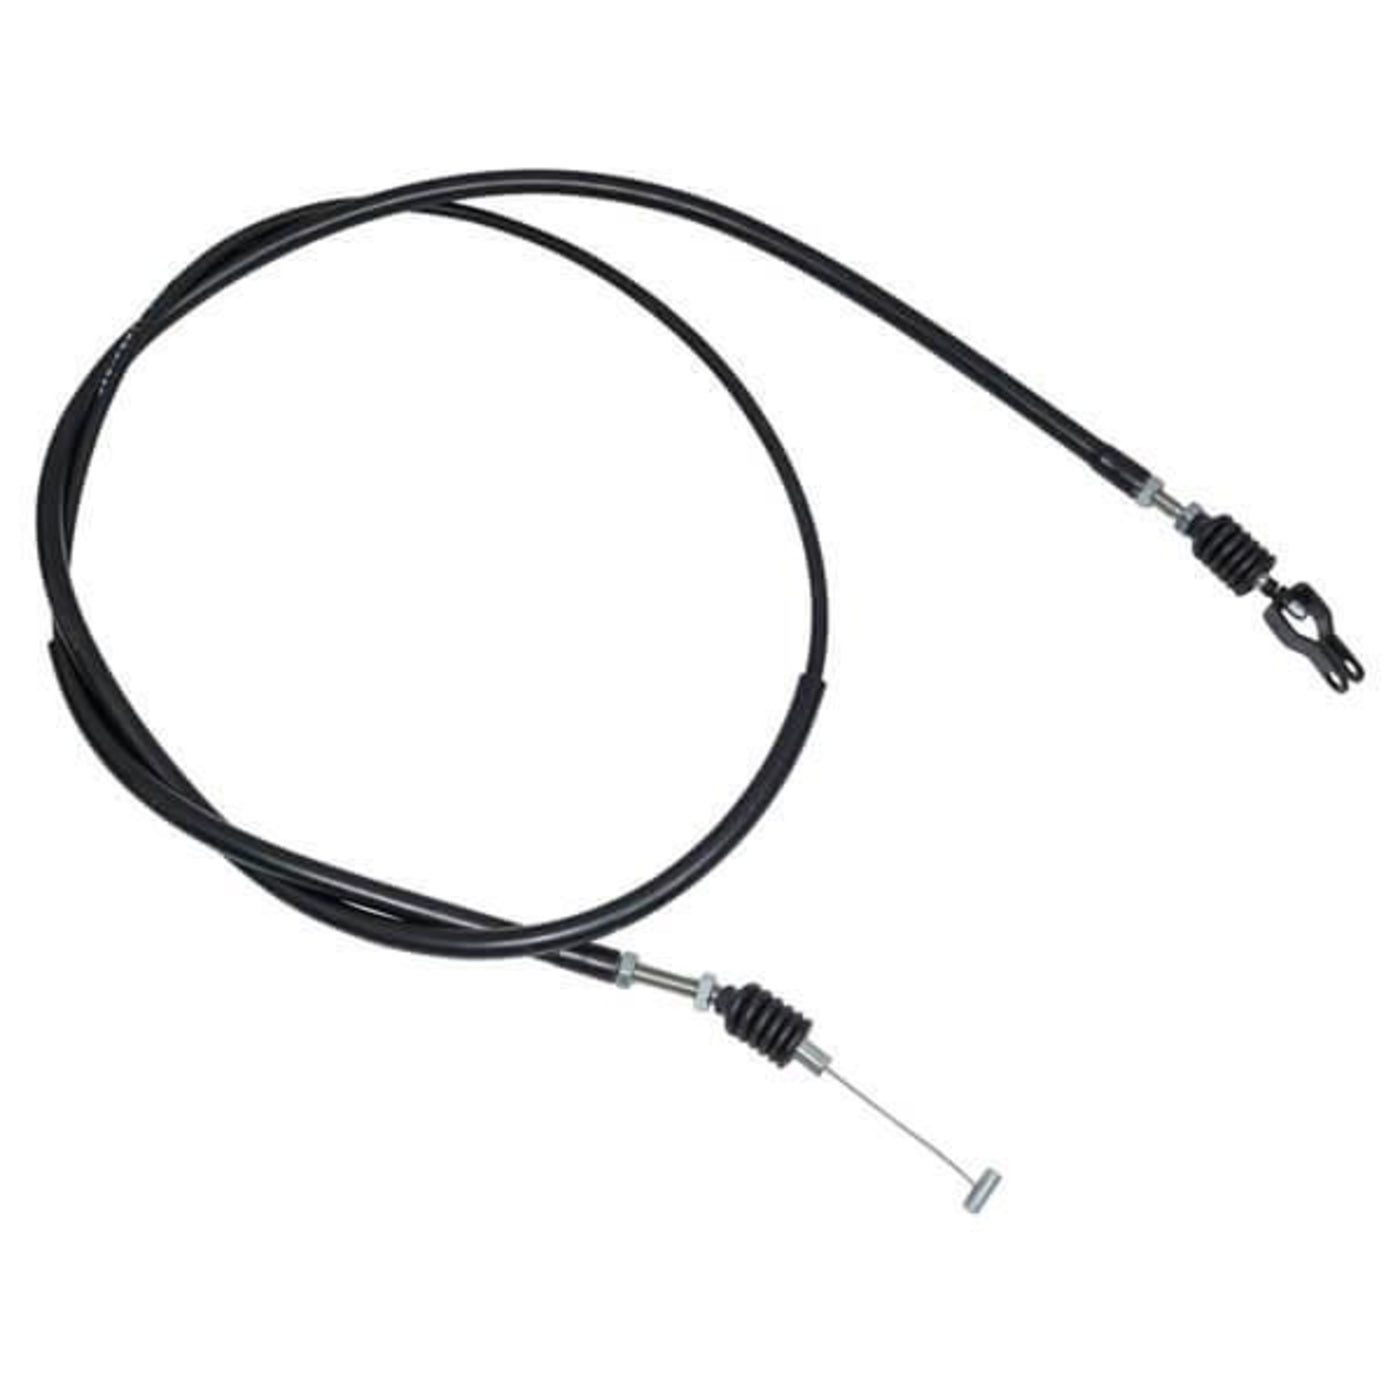 Yamaha G29/Drive 61.5"L Accelerator Cable (Years 2012-2016)